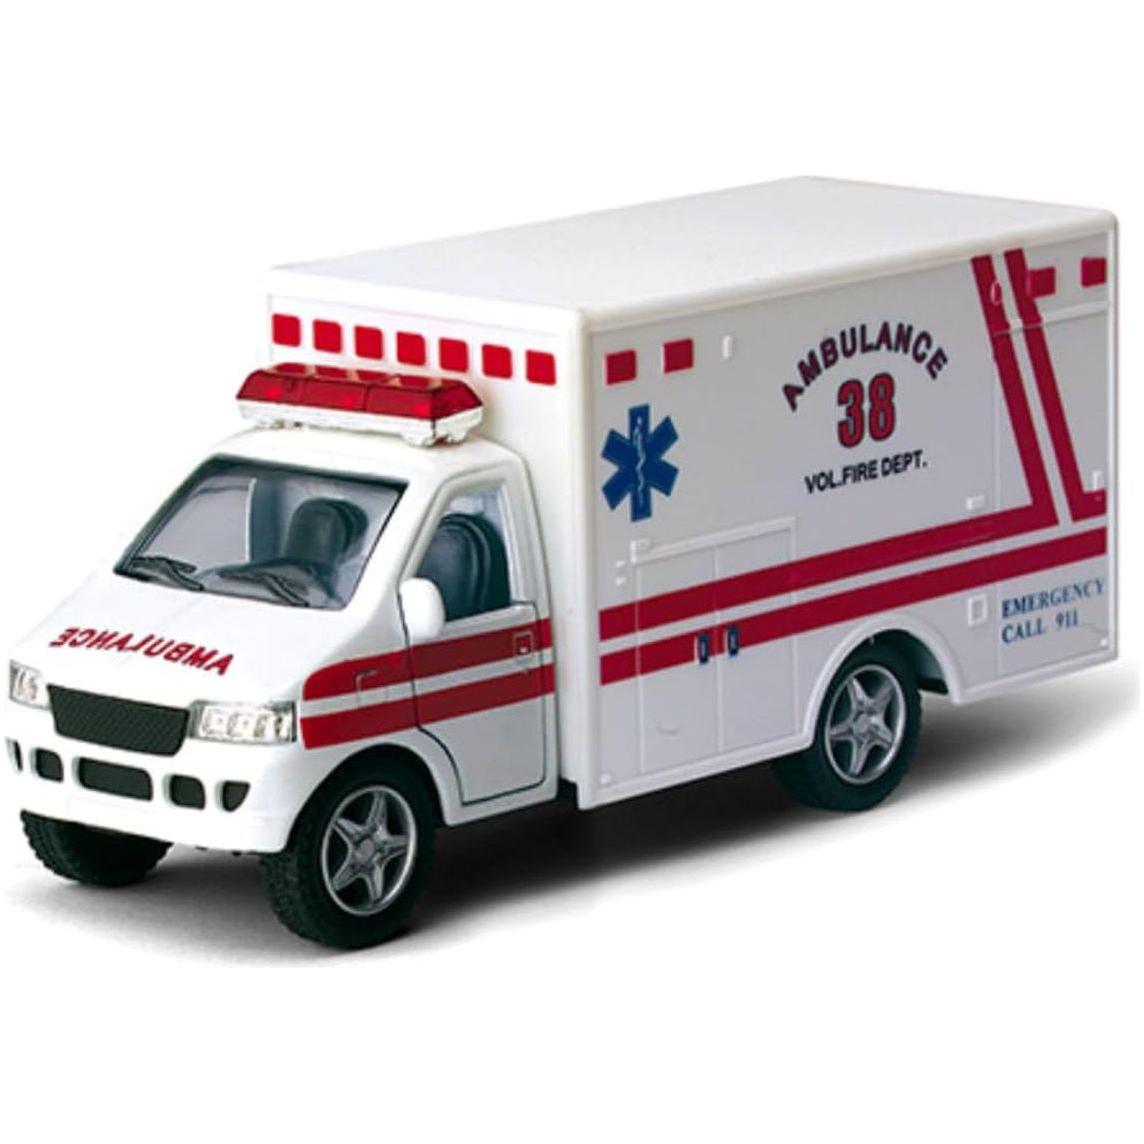 Rescue Team Ambulance 5" Die Cast Metal Cabin W/Pullback Action